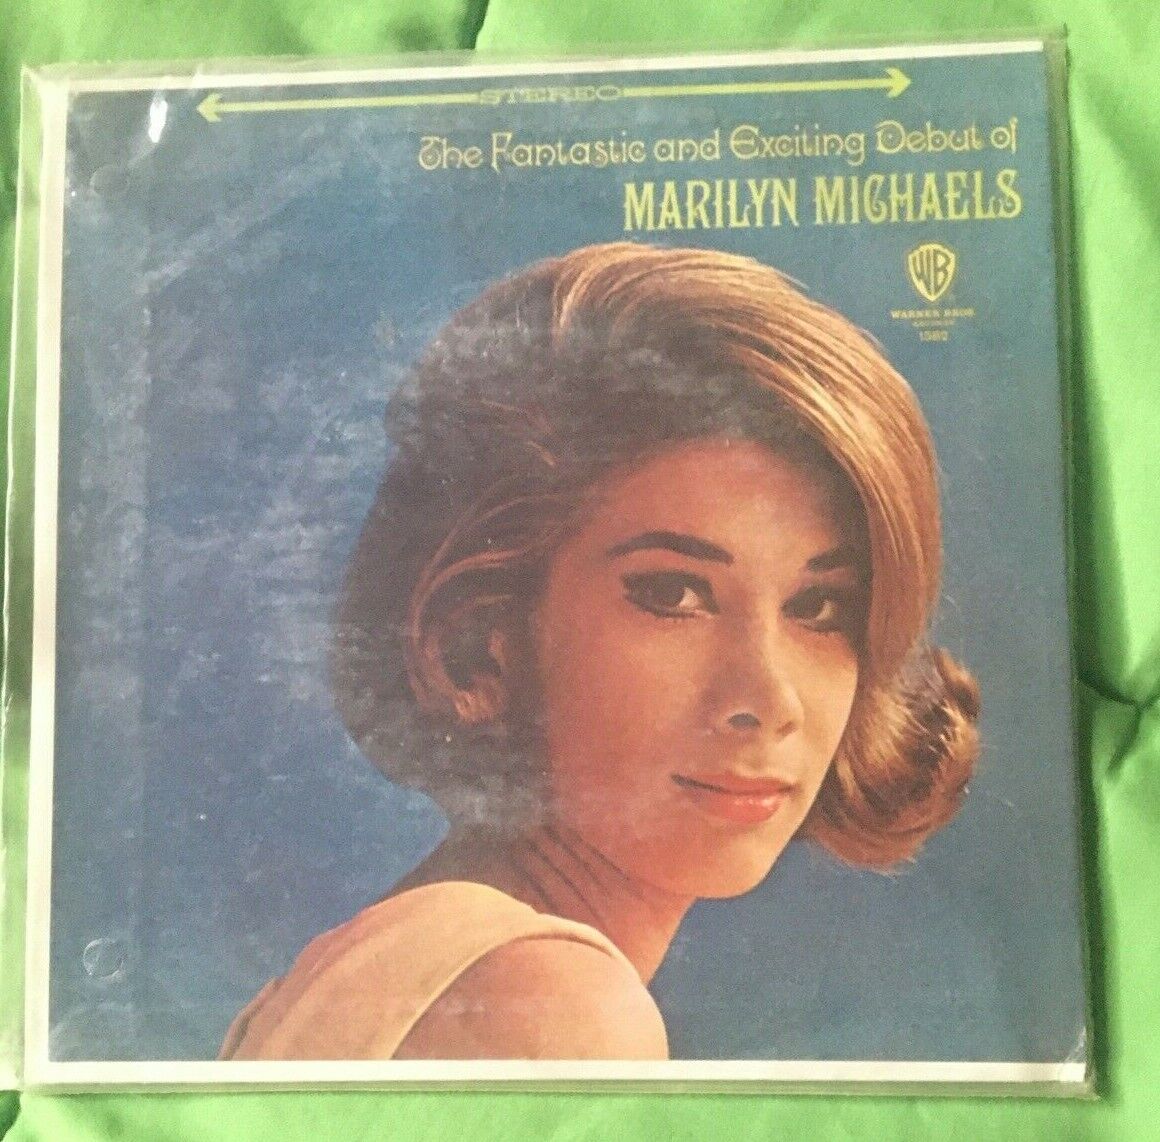 Fantastic & Exciting Debut of Marilyn Michaels Jukebox EP Still Sealed 33 RPM